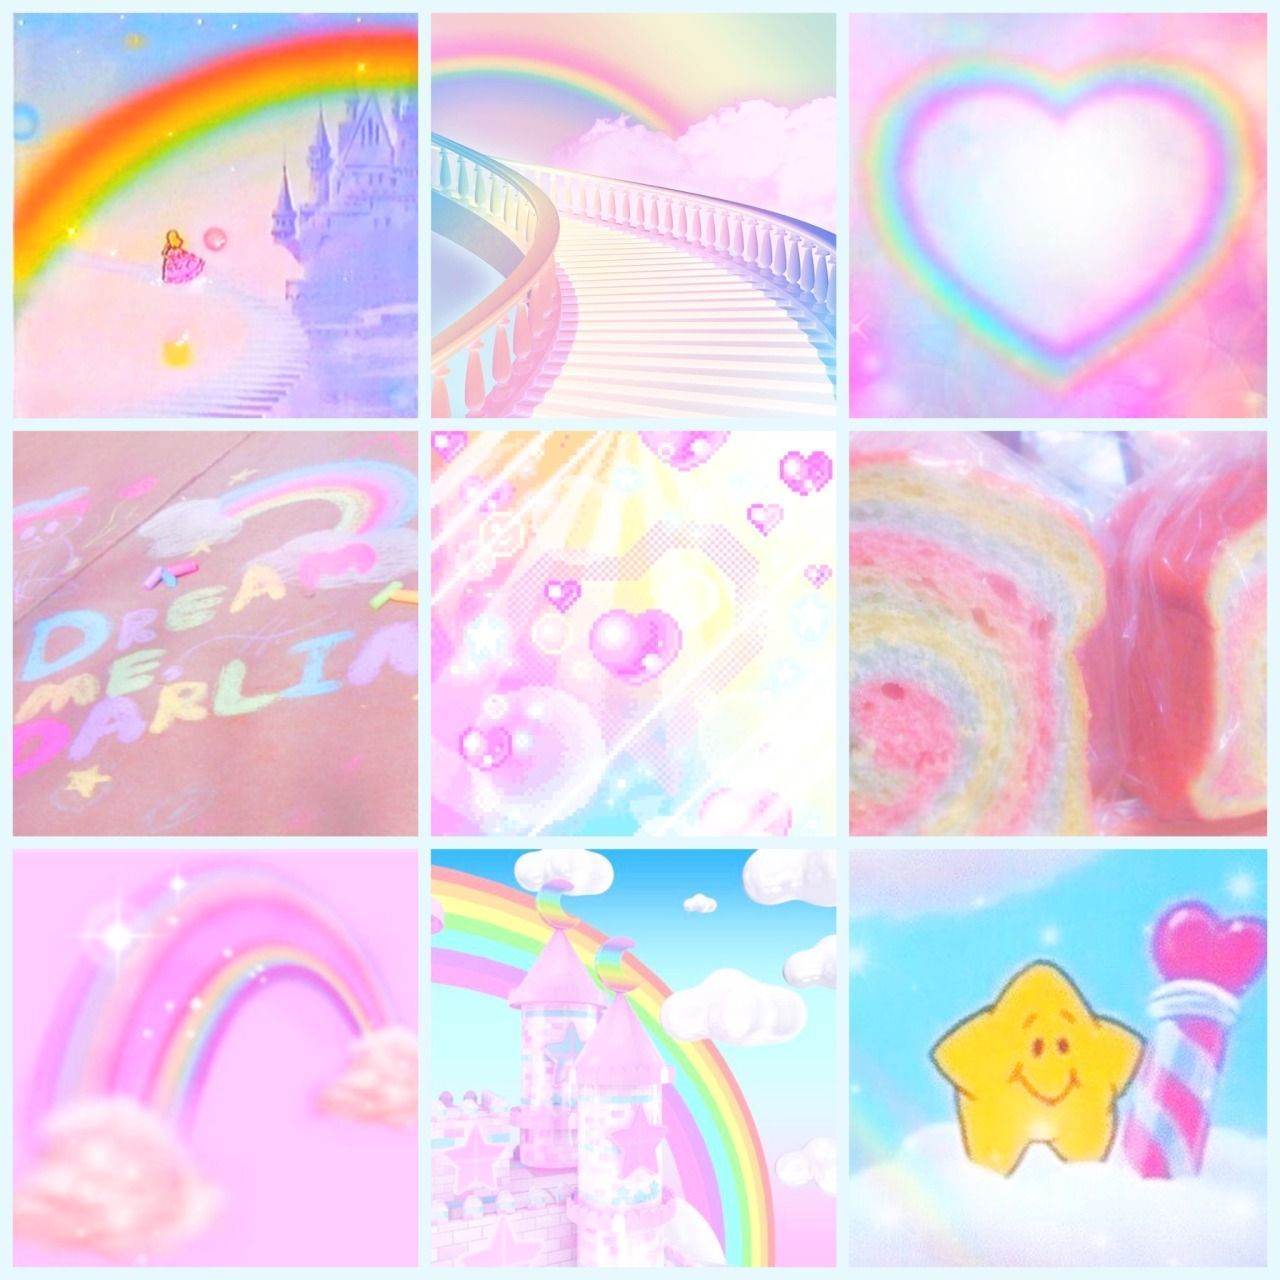 Aesthetic backgrounds of a rainbow, a castle, a heart, and a star - Webcore, kidcore